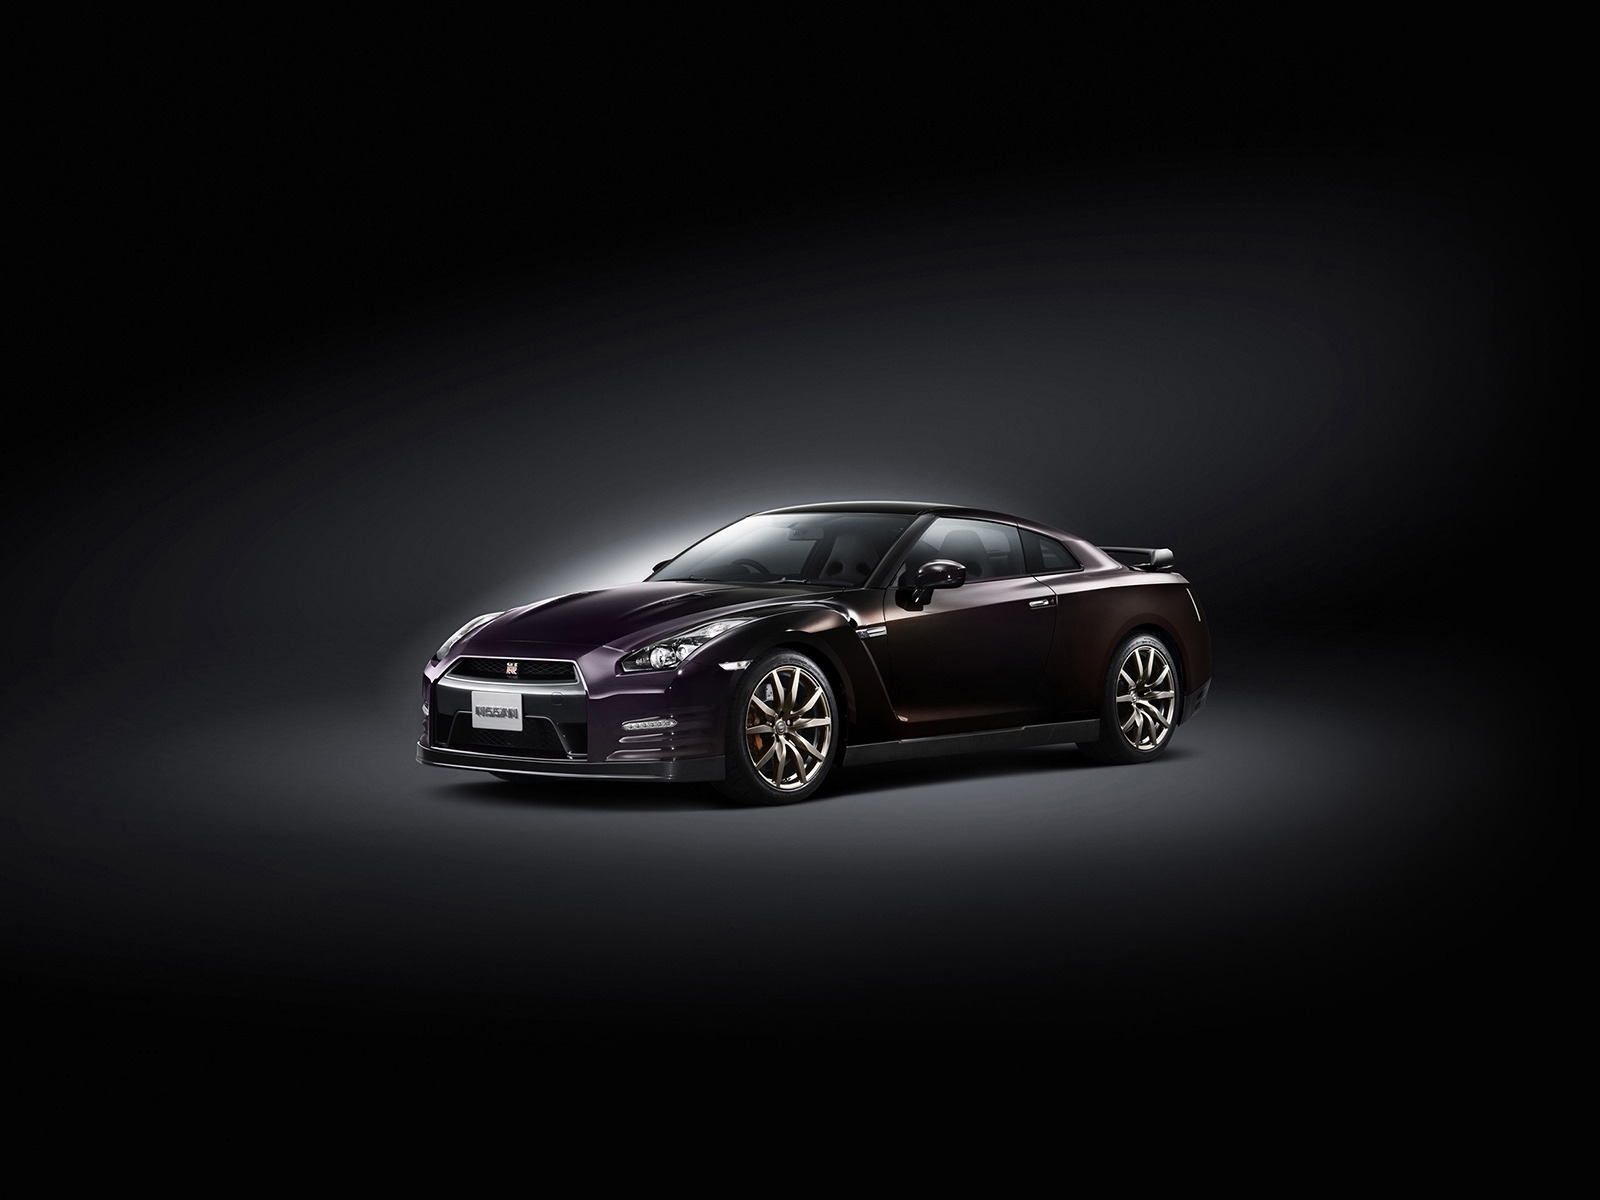 Nissan GT-R Special Edition 2014 for 1600 x 1200 resolution